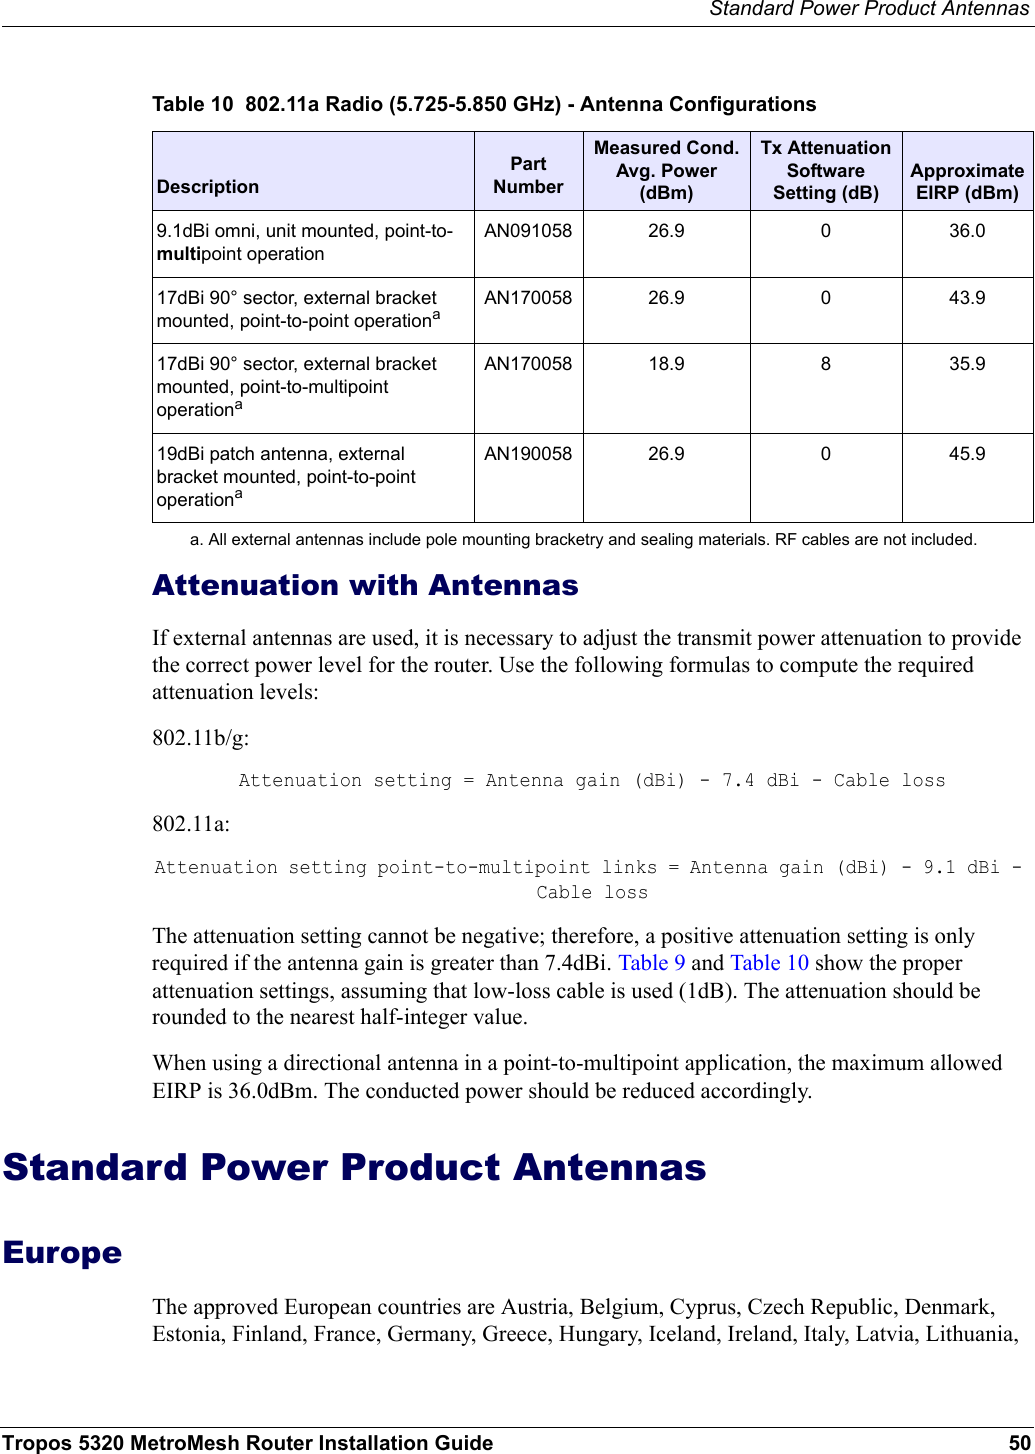 Standard Power Product AntennasTropos 5320 MetroMesh Router Installation Guide 50Attenuation with AntennasIf external antennas are used, it is necessary to adjust the transmit power attenuation to provide the correct power level for the router. Use the following formulas to compute the required attenuation levels:802.11b/g:Attenuation setting = Antenna gain (dBi) - 7.4 dBi - Cable loss 802.11a:Attenuation setting point-to-multipoint links = Antenna gain (dBi) - 9.1 dBi - Cable lossThe attenuation setting cannot be negative; therefore, a positive attenuation setting is only required if the antenna gain is greater than 7.4dBi. Table 9 and Table 10 show the proper attenuation settings, assuming that low-loss cable is used (1dB). The attenuation should be rounded to the nearest half-integer value. When using a directional antenna in a point-to-multipoint application, the maximum allowed EIRP is 36.0dBm. The conducted power should be reduced accordingly.Standard Power Product AntennasEuropeThe approved European countries are Austria, Belgium, Cyprus, Czech Republic, Denmark, Estonia, Finland, France, Germany, Greece, Hungary, Iceland, Ireland, Italy, Latvia, Lithuania, Table 10  802.11a Radio (5.725-5.850 GHz) - Antenna ConfigurationsDescriptionPart NumberMeasured Cond. Avg. Power (dBm)Tx Attenuation Software Setting (dB)Approximate EIRP (dBm)9.1dBi omni, unit mounted, point-to-multi point operationAN091058 26.9 0 36.017dBi 90° sector, external bracket mounted, point-to-point operationaa. All external antennas include pole mounting bracketry and sealing materials. RF cables are not included.AN170058 26.9 0 43.917dBi 90° sector, external bracket mounted, point-to-multipoint operationaAN170058 18.9 8 35.919dBi patch antenna, external bracket mounted, point-to-point operationaAN190058 26.9 0 45.9